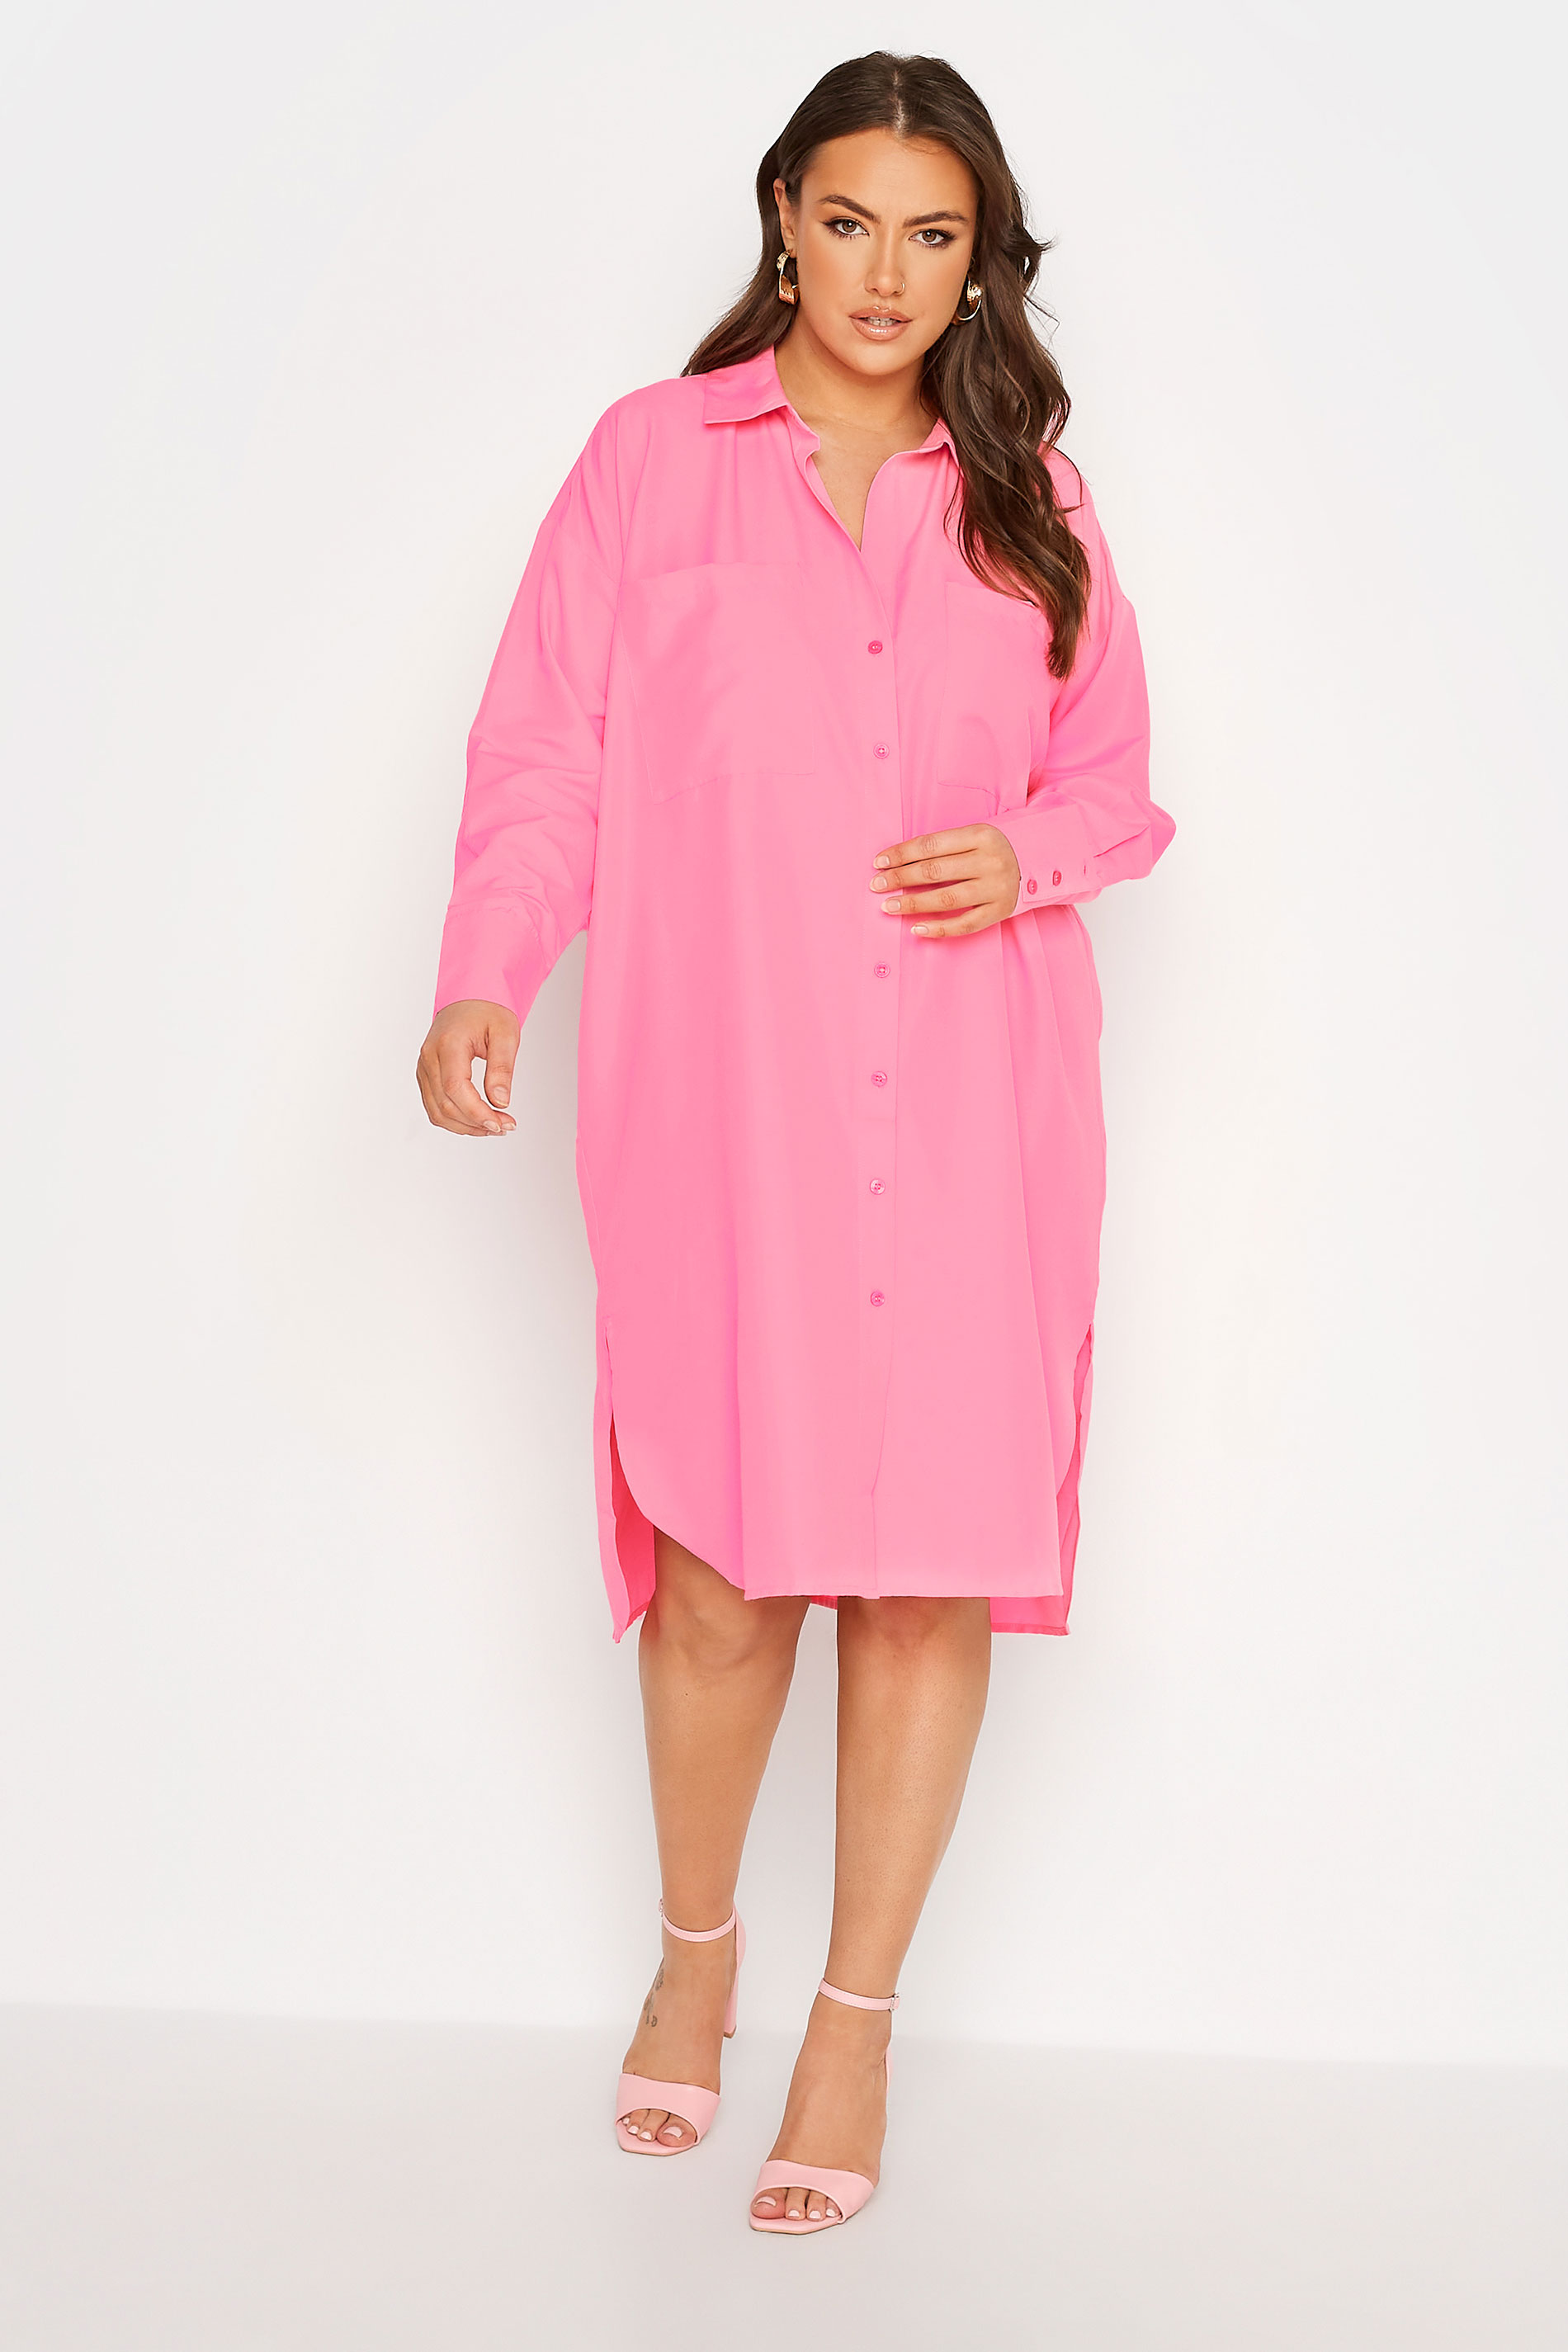 LIMITED COLLECTION Curve Neon Pink Midi Shirt Dress_A.jpg